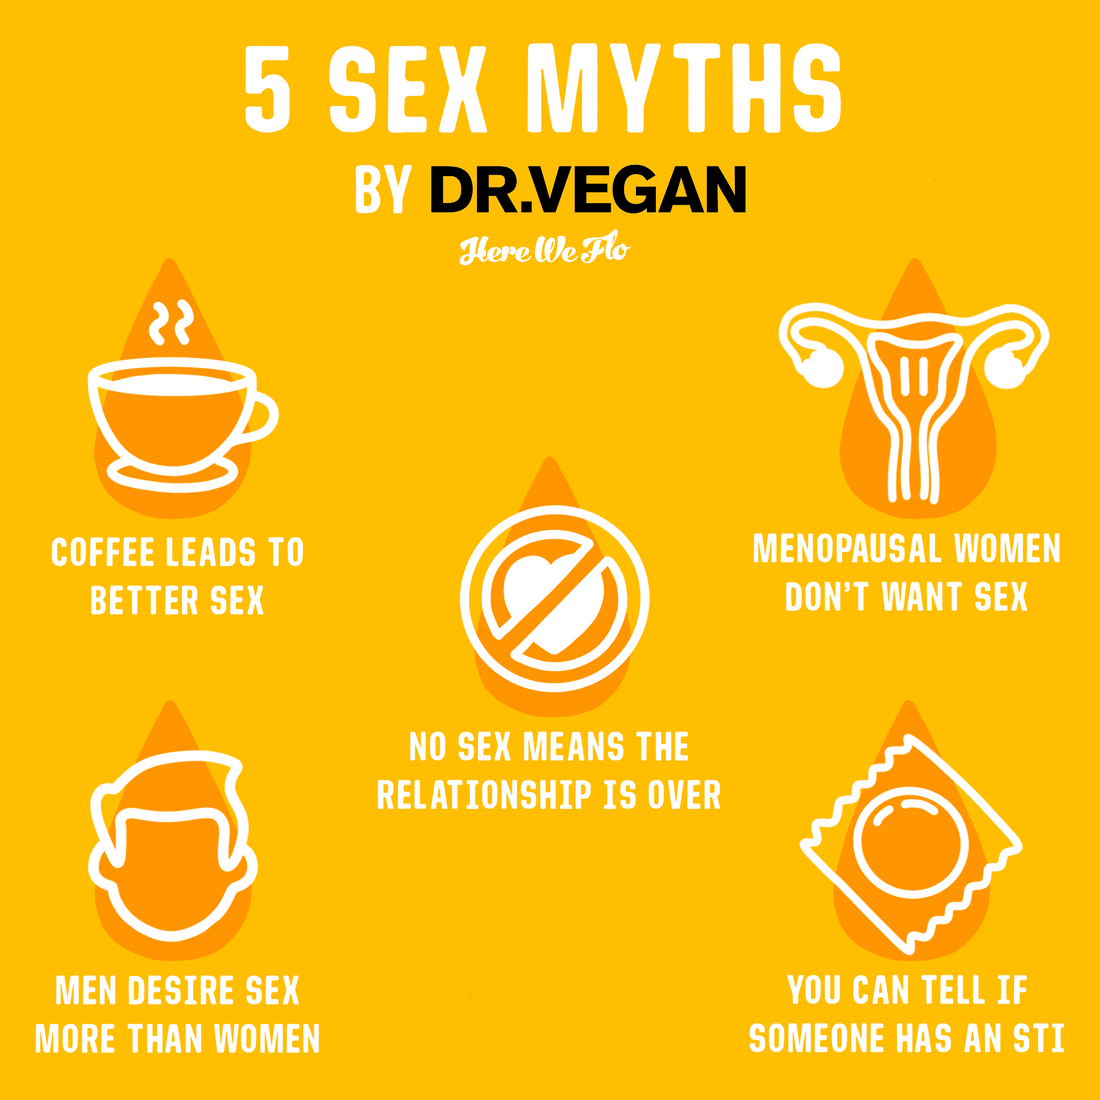 5 sex myths we’re putting to bed